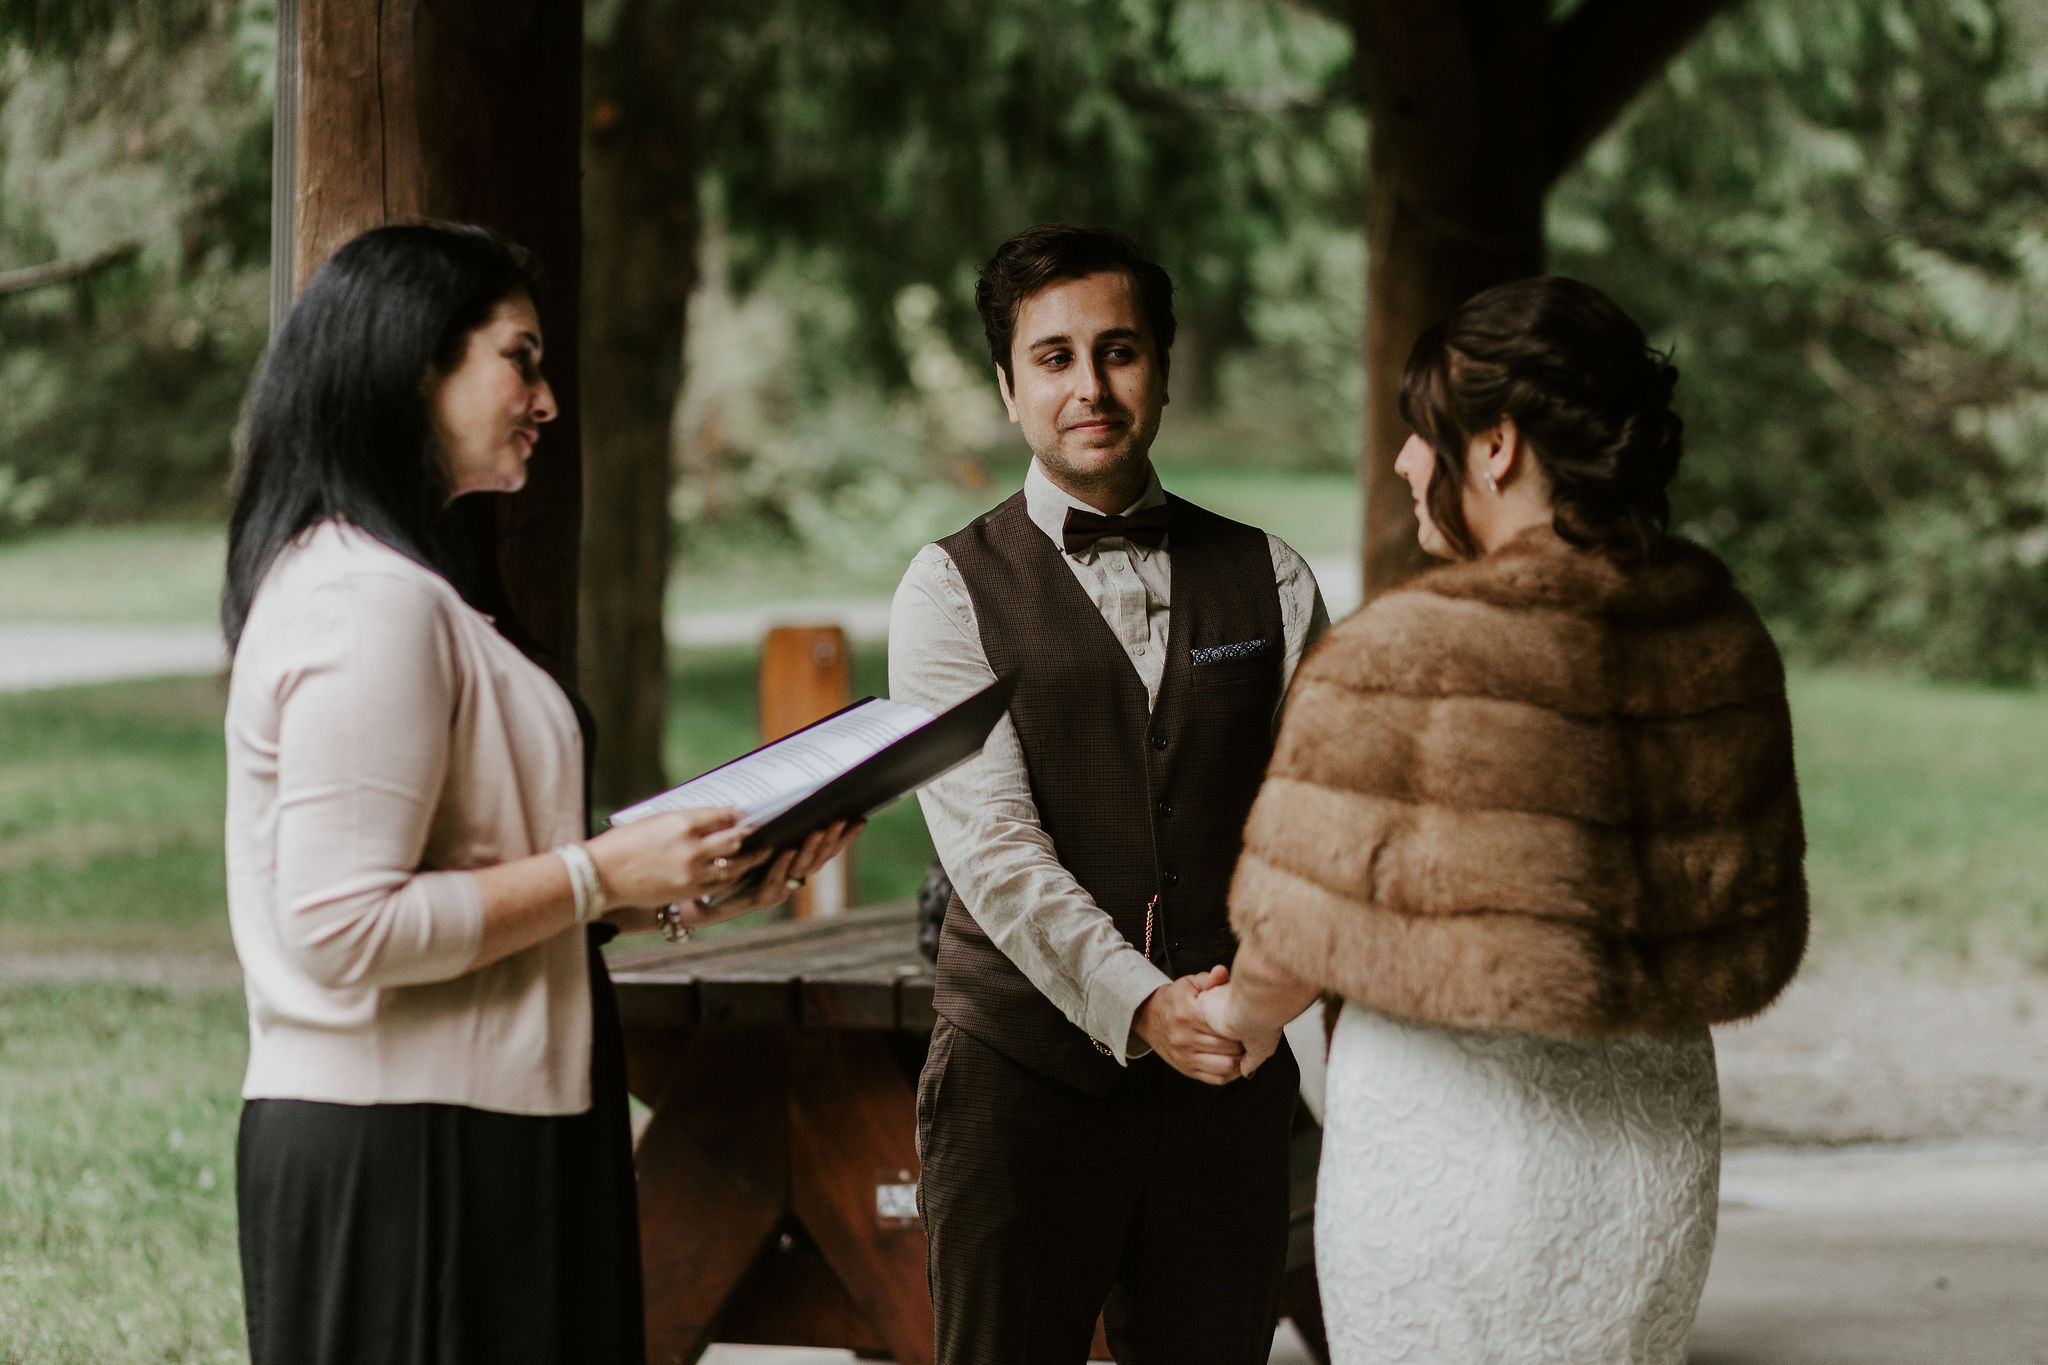 How to choose your wedding officiant